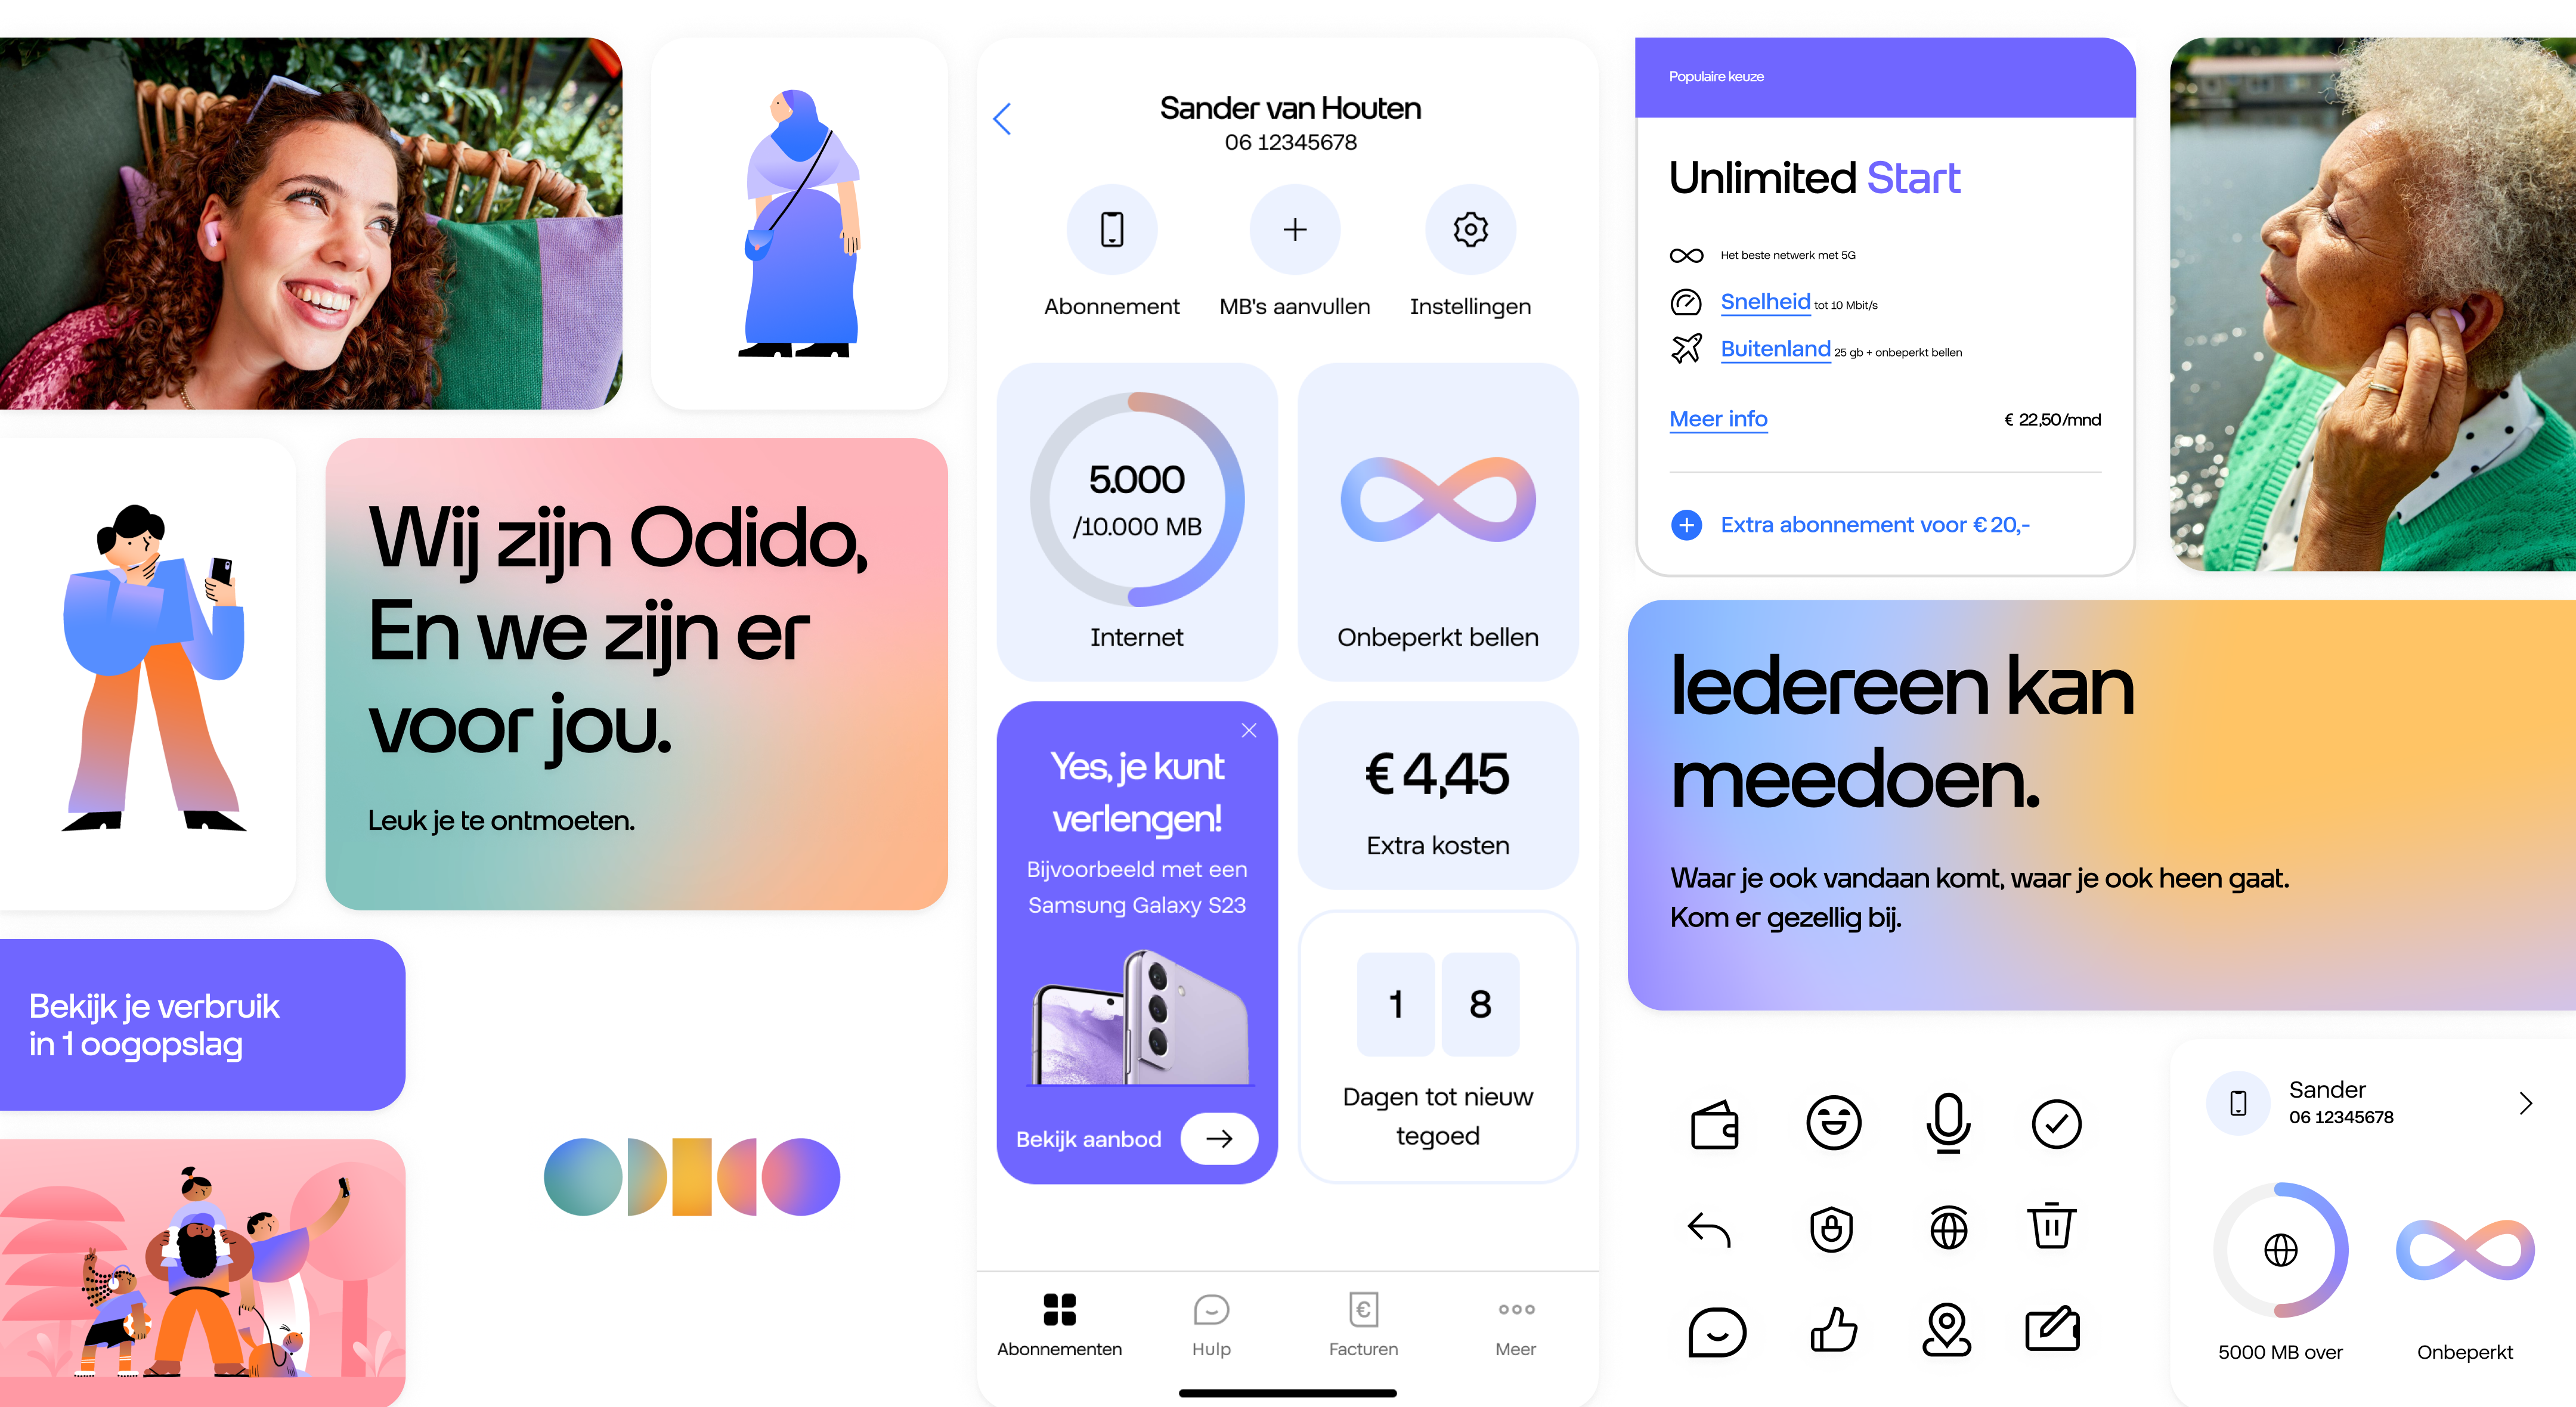 An overview of components, photos and icons that form the App design system of Odido